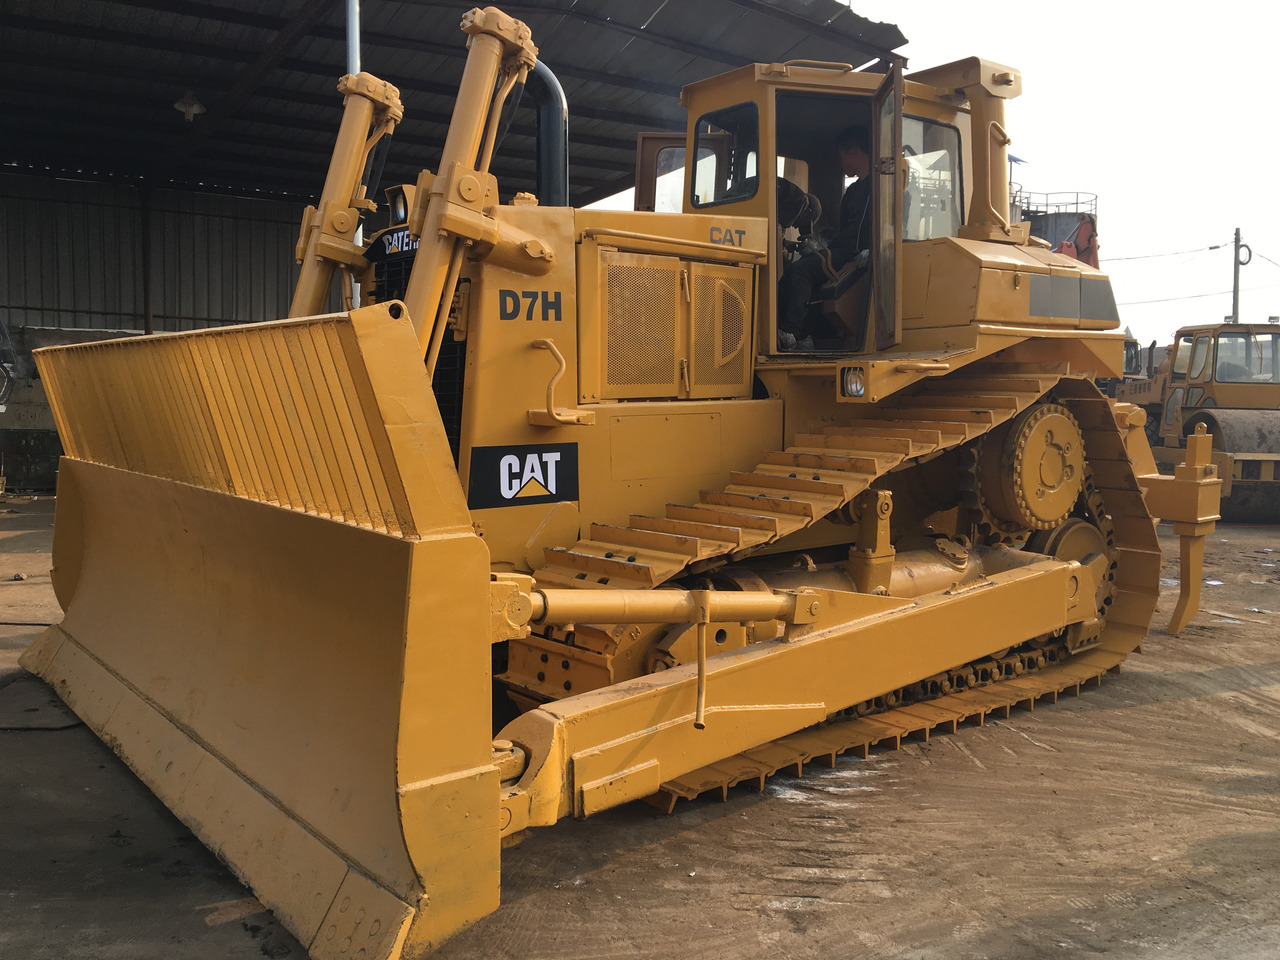 Nowy Spycharka Famous brand CATERPILLAR D7H in good condition on sale: zdjęcie 3